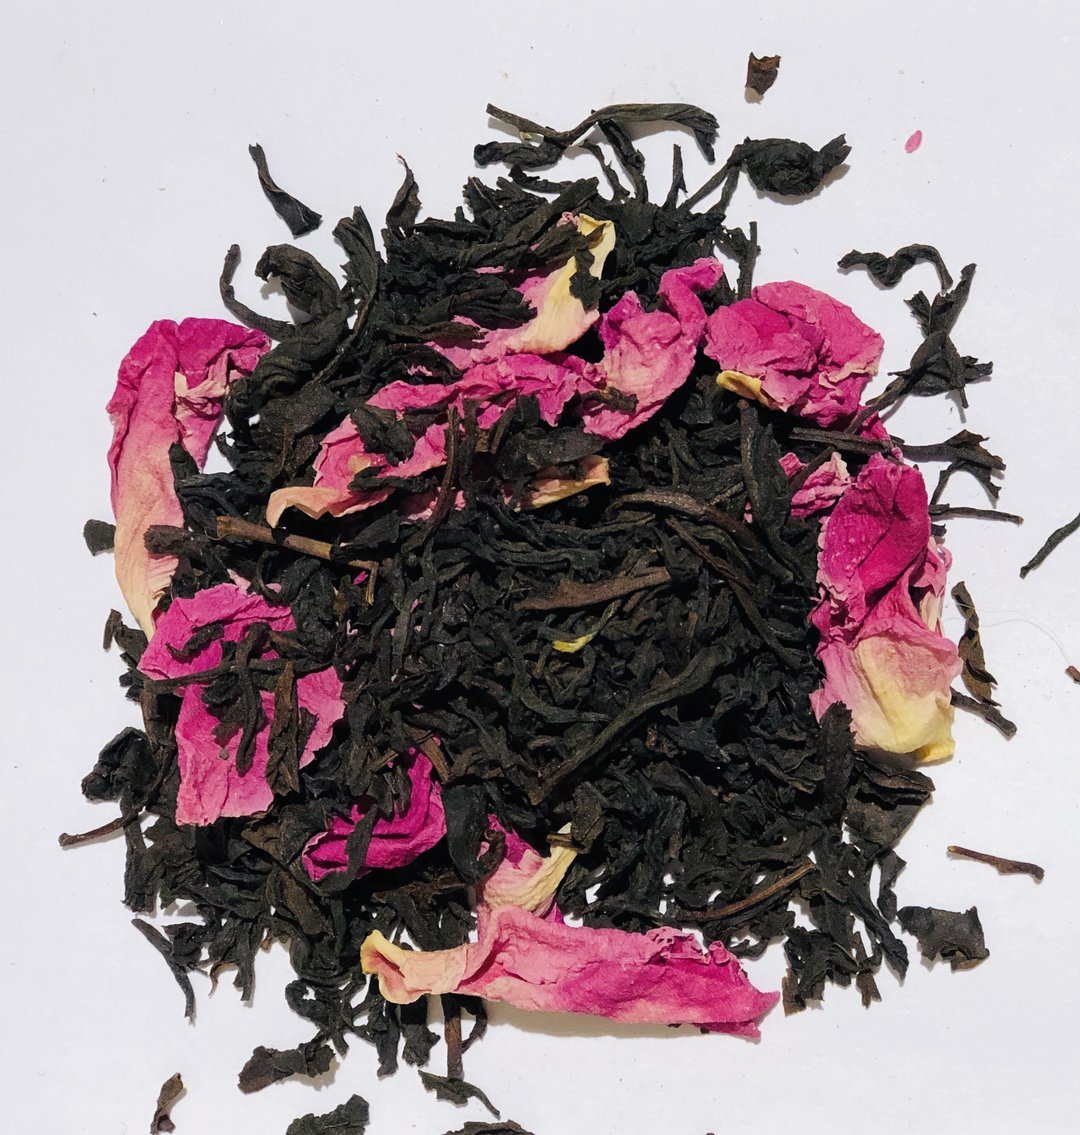 Our classic Rose Grey loose leaf tea, is the perfect gift for any tea lover.  Best loose leaf tea / best tasting Australian tea.  This Rose Grey tea is part of a collection of organic loose leaf teas, which come in a range of pretty eco friendly reusable tea canisters. Mix and match the entire loose leaf tea collection, collect all colours and blends or make a tea lovers day with the perfect tea gift.